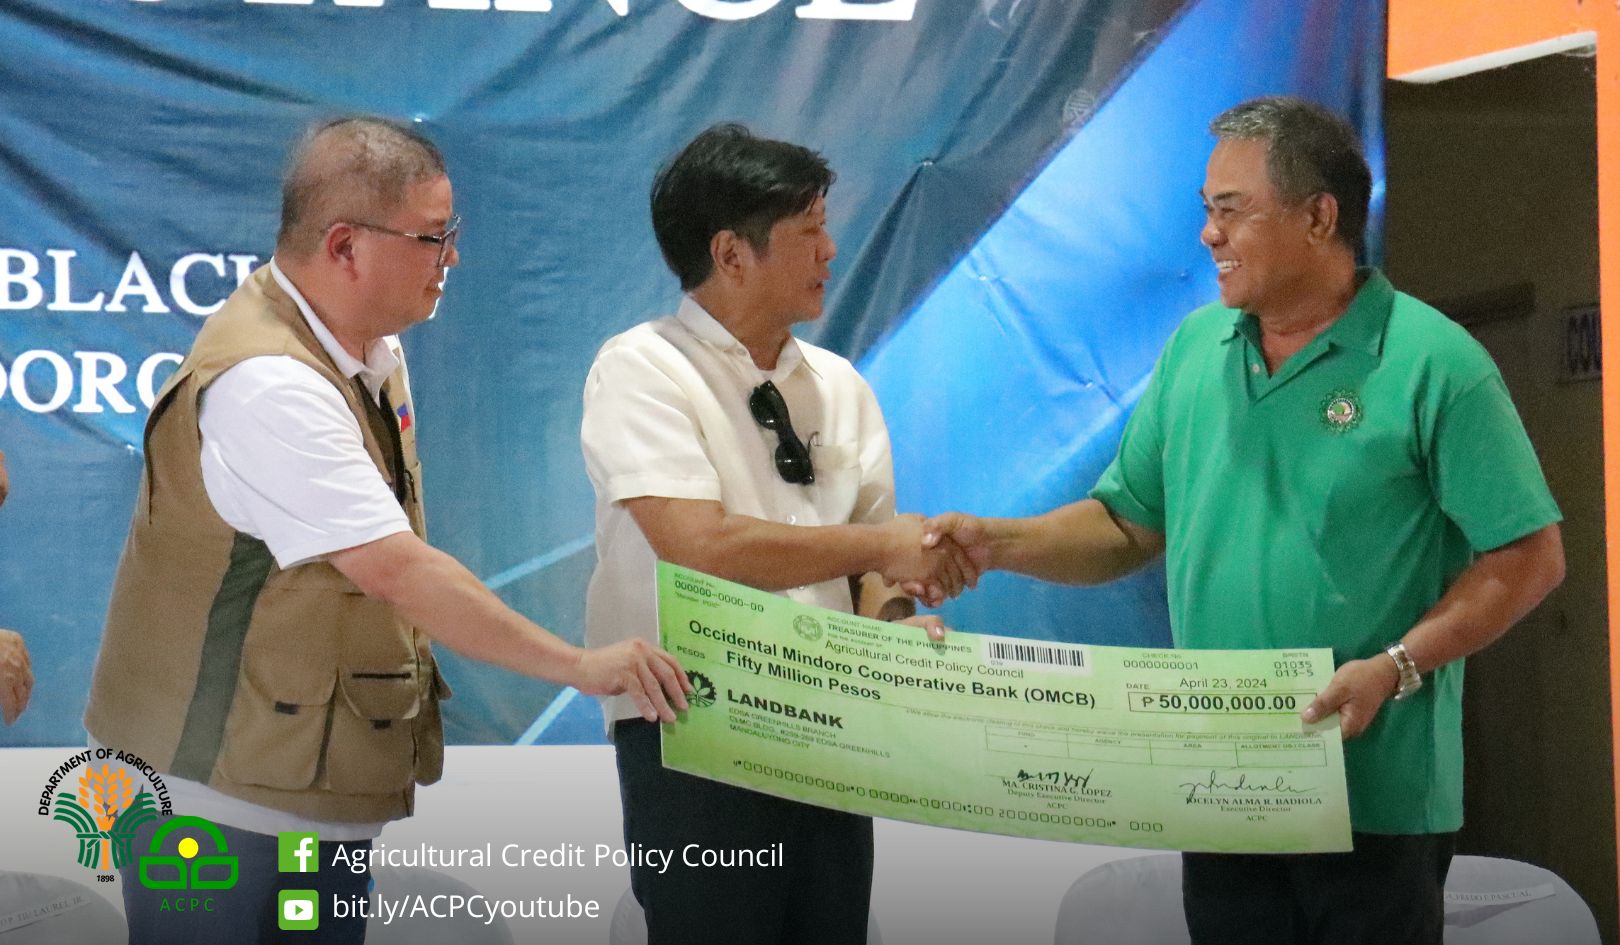 DA-ACPC Provides P77.5 Million to Help Farmers and Fishers in Occidental Mindoro Affected by El Niño through SURE